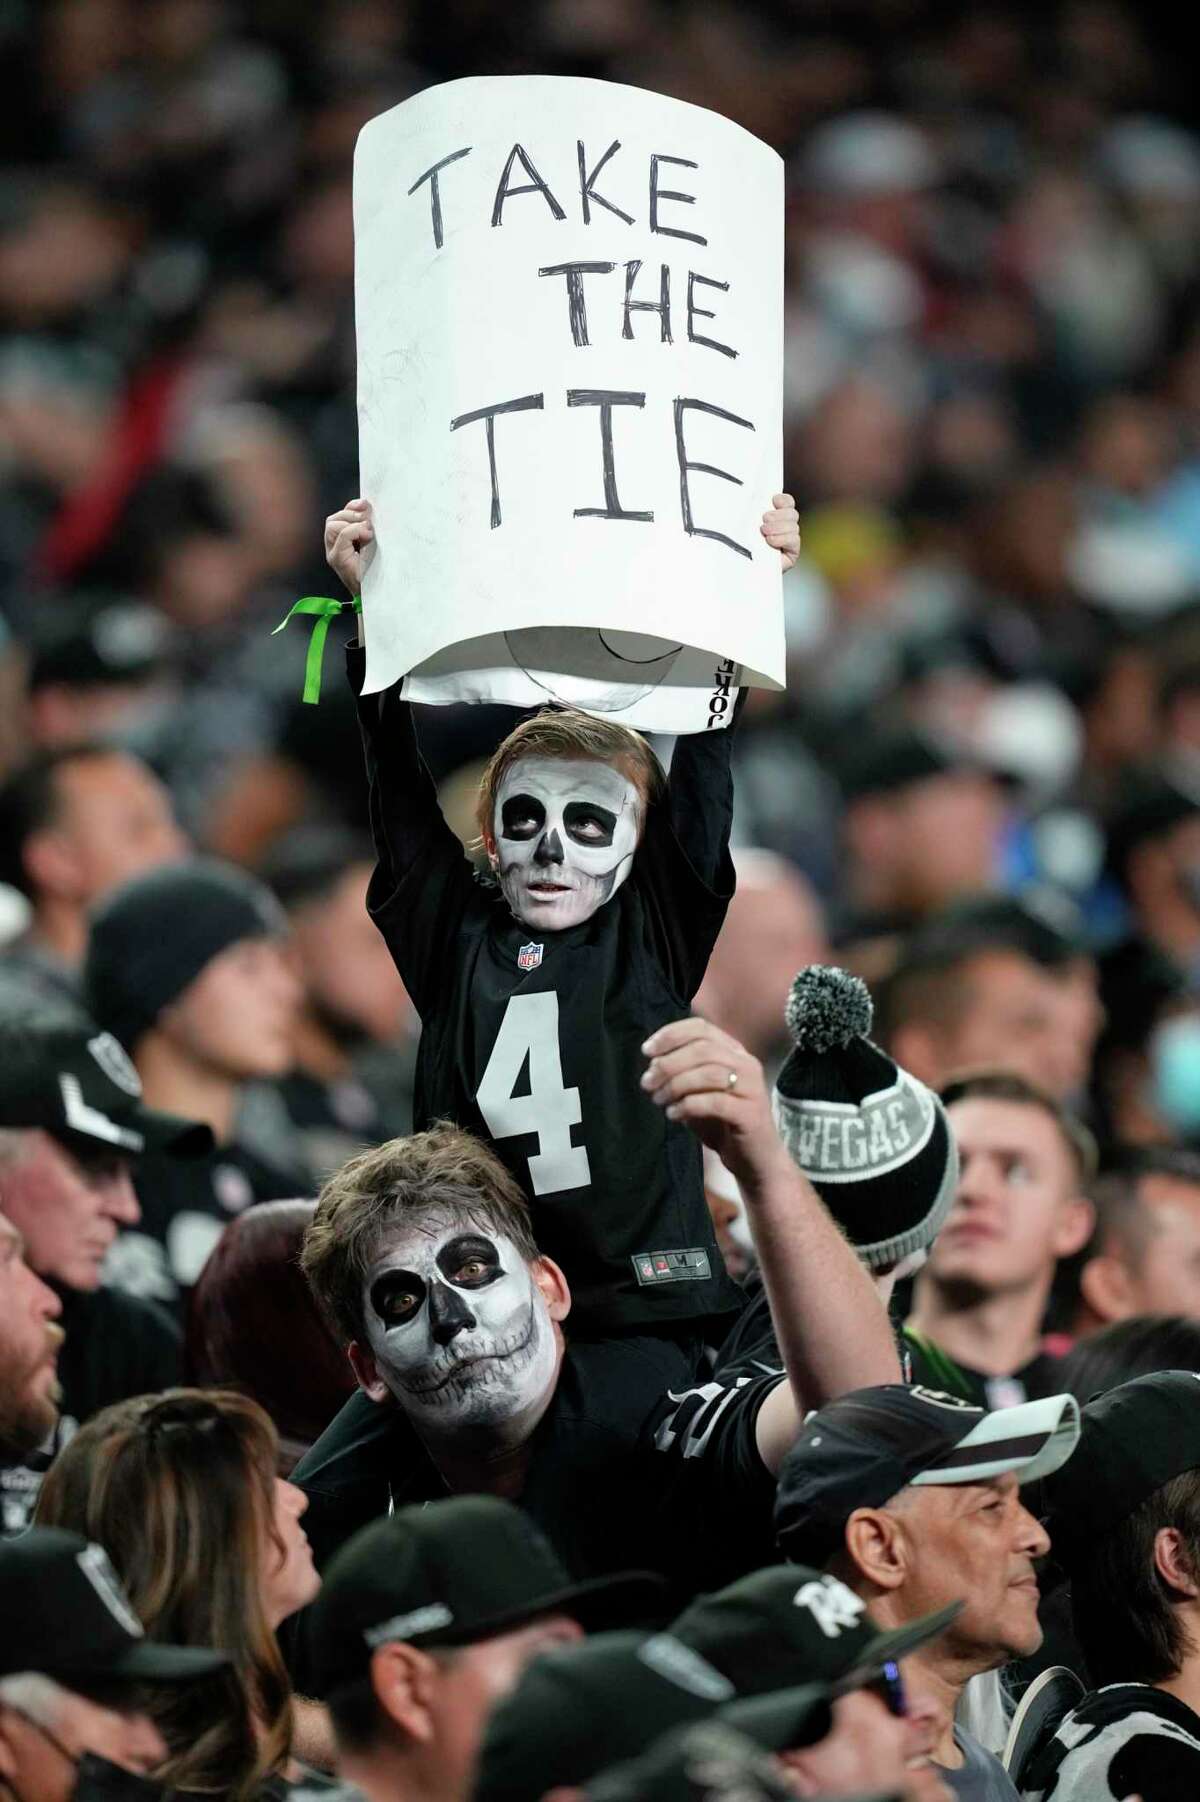 A young fan holds up a sign during overtime of an NFL football game between the Las Vegas Raiders and the Los Angeles Chargers, Sunday, Jan. 9, 2022, in Las Vegas. (AP Photo/Jeff Bottari)